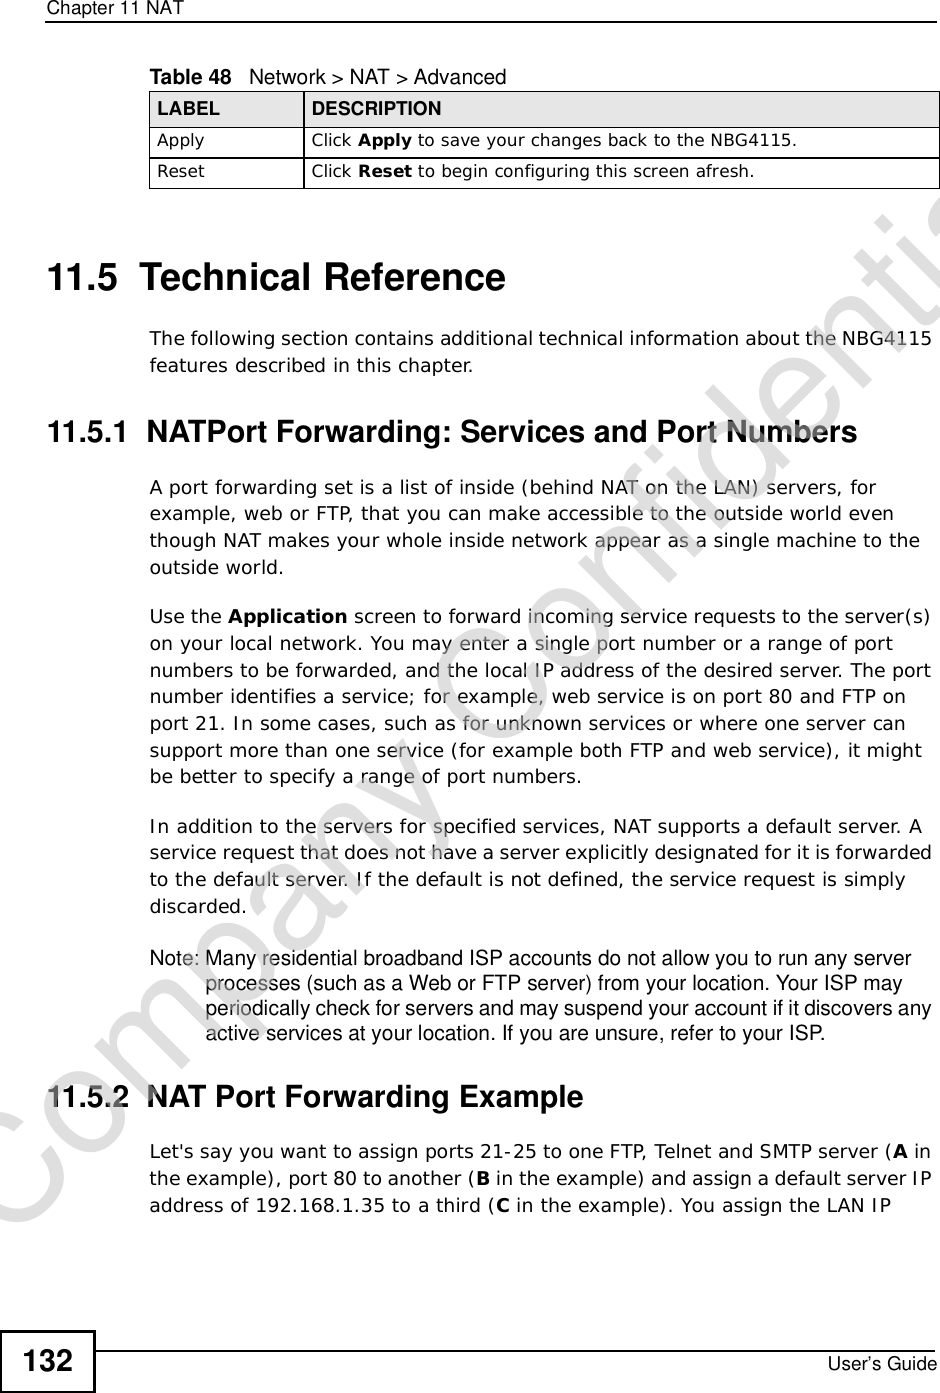 Chapter 11NATUser’s Guide13211.5  Technical ReferenceThe following section contains additional technical information about the NBG4115 features described in this chapter.11.5.1  NATPort Forwarding: Services and Port NumbersA port forwarding set is a list of inside (behind NAT on the LAN) servers, for example, web or FTP, that you can make accessible to the outside world even though NAT makes your whole inside network appear as a single machine to the outside world. Use the Application screen to forward incoming service requests to the server(s) on your local network. You may enter a single port number or a range of port numbers to be forwarded, and the local IP address of the desired server. The port number identifies a service; for example, web service is on port 80 and FTP on port 21. In some cases, such as for unknown services or where one server can support more than one service (for example both FTP and web service), it might be better to specify a range of port numbers.In addition to the servers for specified services, NAT supports a default server. A service request that does not have a server explicitly designated for it is forwarded to the default server. If the default is not defined, the service request is simply discarded.Note: Many residential broadband ISP accounts do not allow you to run any server processes (such as a Web or FTP server) from your location. Your ISP may periodically check for servers and may suspend your account if it discovers any active services at your location. If you are unsure, refer to your ISP.11.5.2  NAT Port Forwarding ExampleLet&apos;s say you want to assign ports 21-25 to one FTP, Telnet and SMTP server (A in the example), port 80 to another (B in the example) and assign a default server IP address of 192.168.1.35 to a third (C in the example). You assign the LAN IP Apply Click Apply to save your changes back to the NBG4115.Reset Click Reset to begin configuring this screen afresh.Table 48   Network &gt; NAT &gt; AdvancedLABEL DESCRIPTIONCompany Confidential